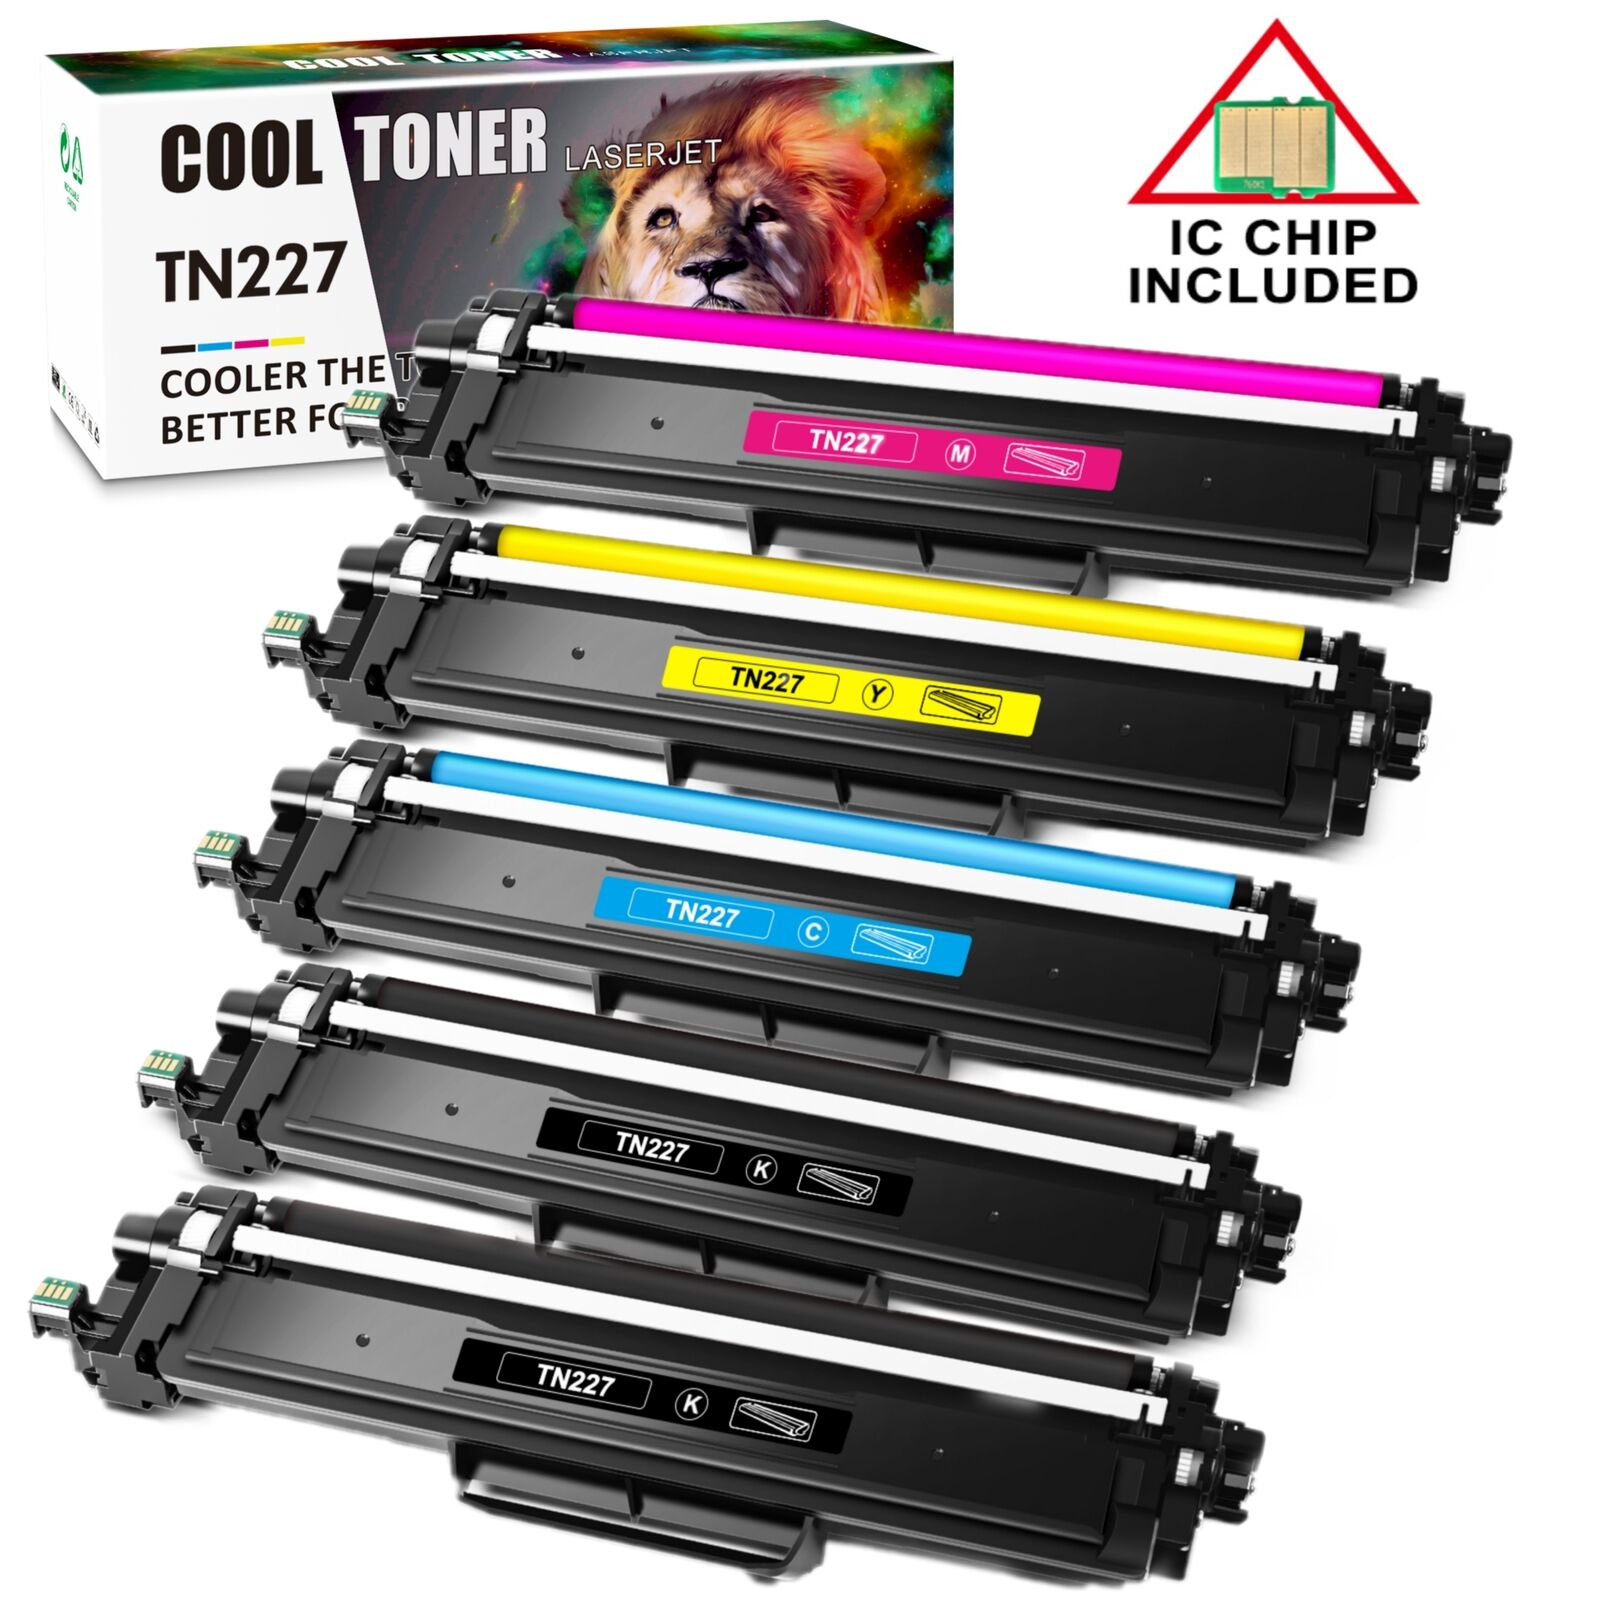 5Pc TN227 TN223 Toner Cartridge replacement for Brother MFC-L3770CDW HL-L3270CDW